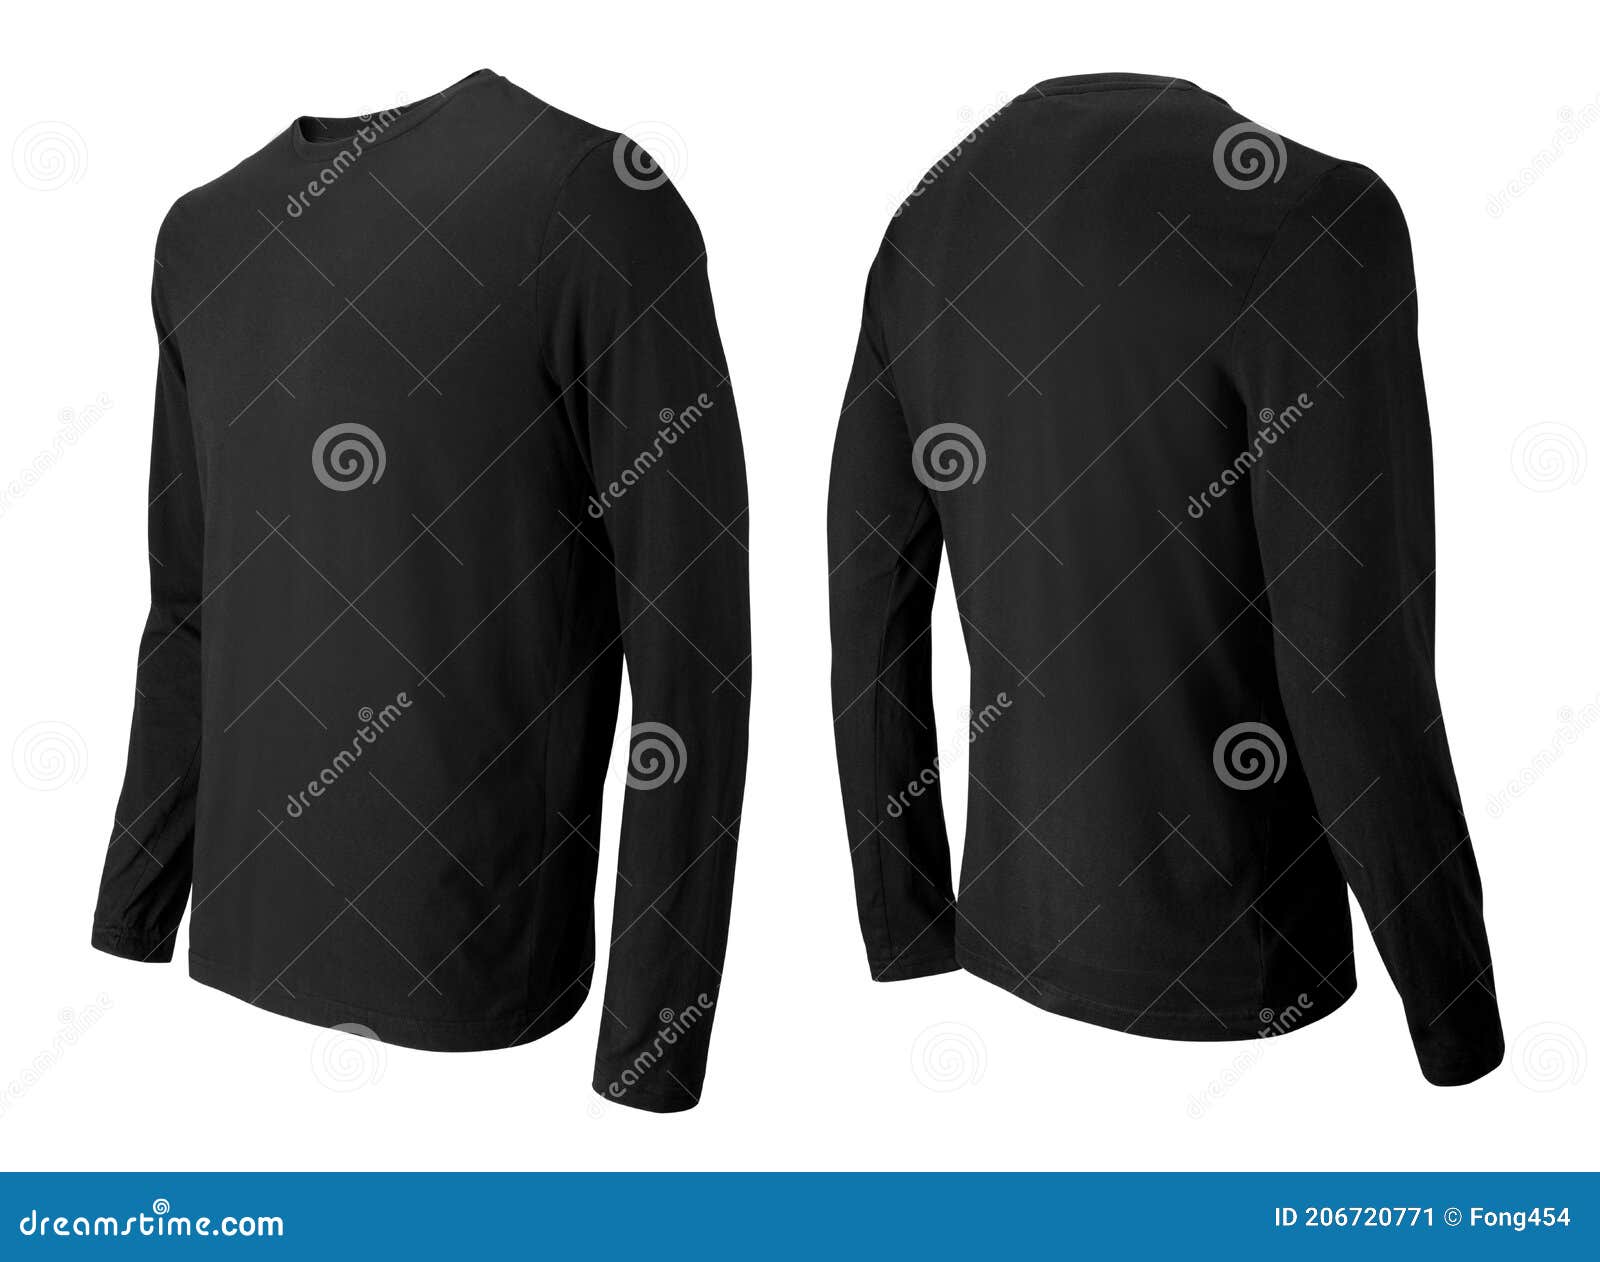 long sleeve black t-shirt front and back side view  on white